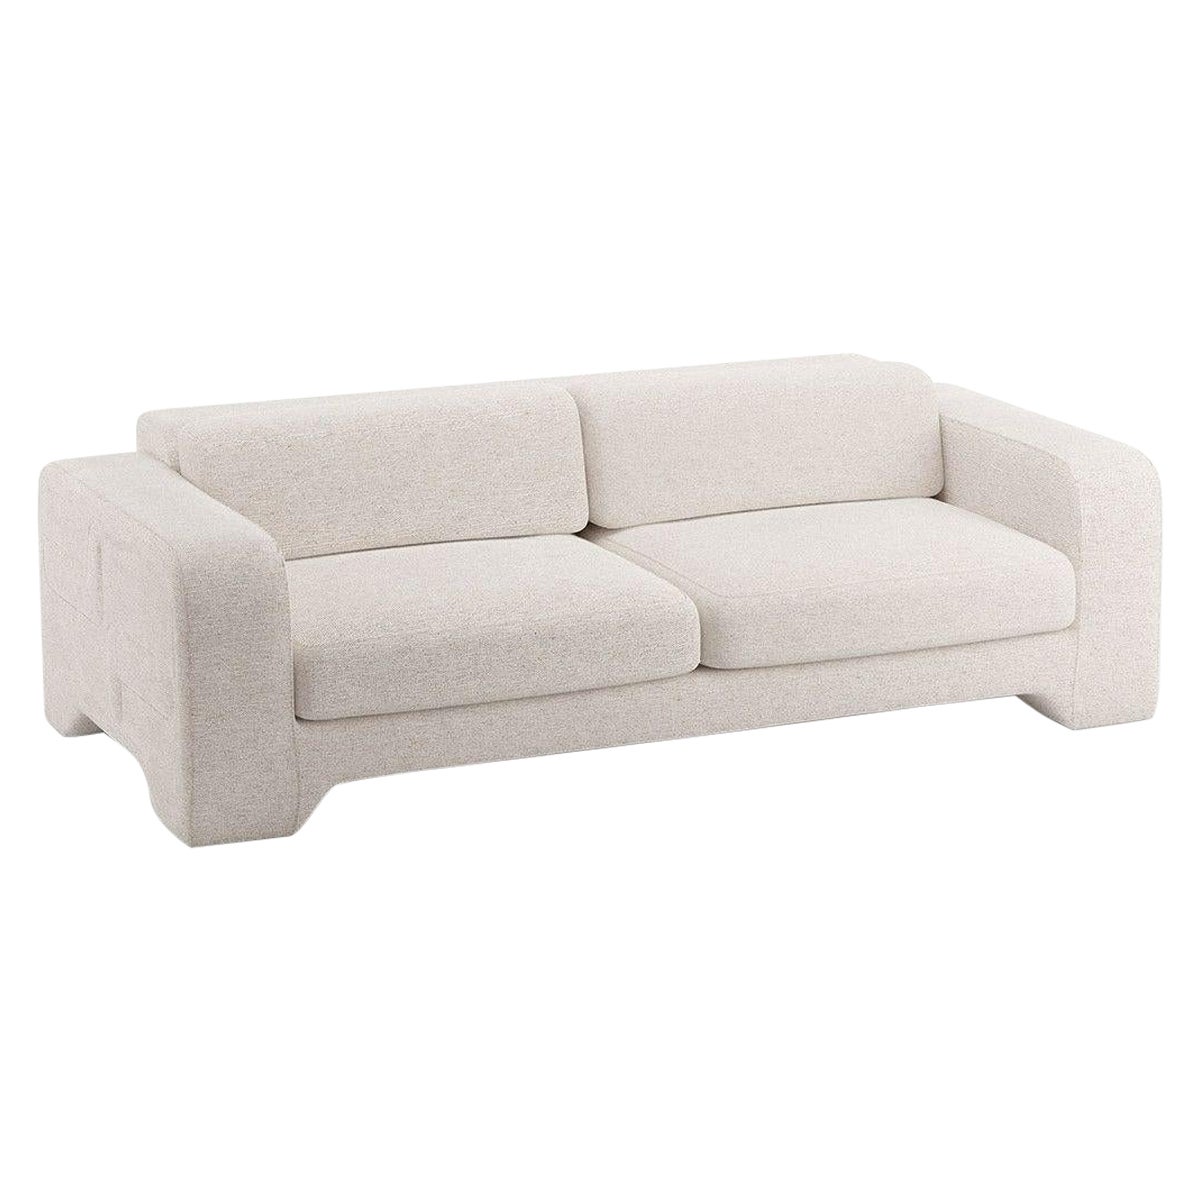 Popus Editions Giovanna 3 Seater Sofa in Otter Megeve Fabric with Knit Effect For Sale